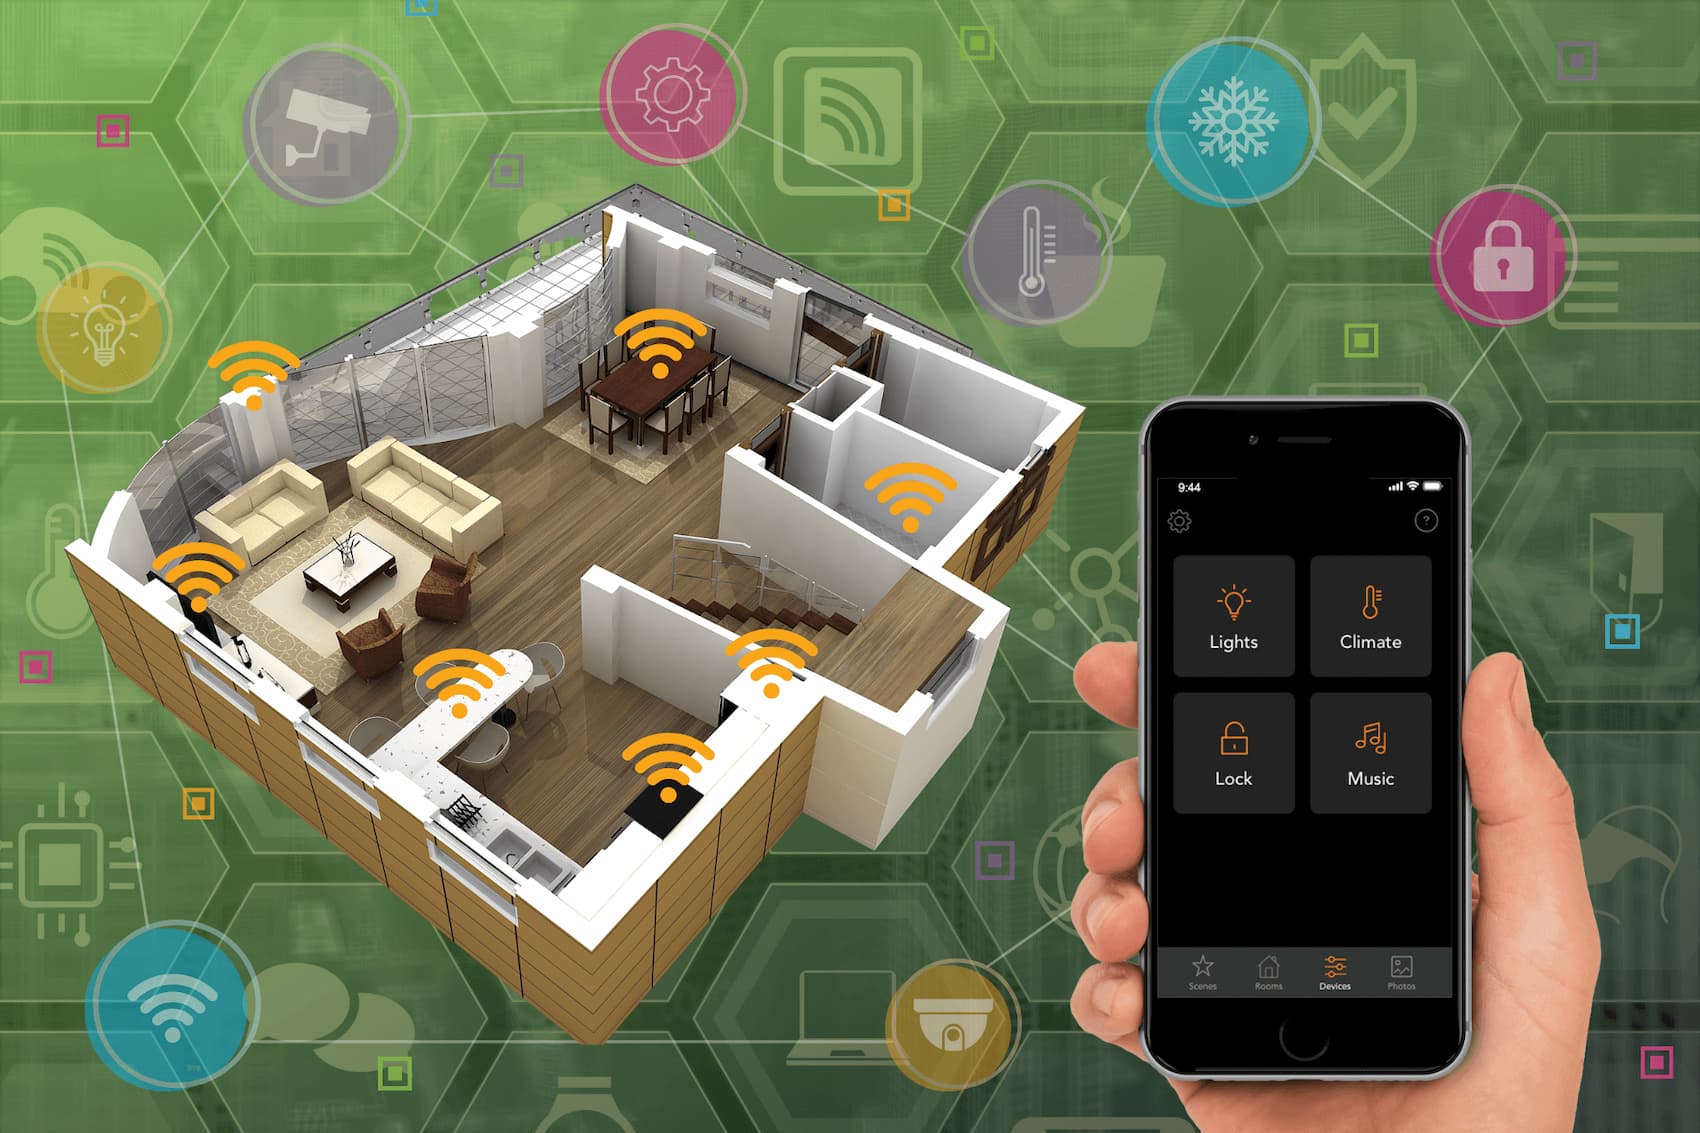 Easy Home - Smart Home on the App Store